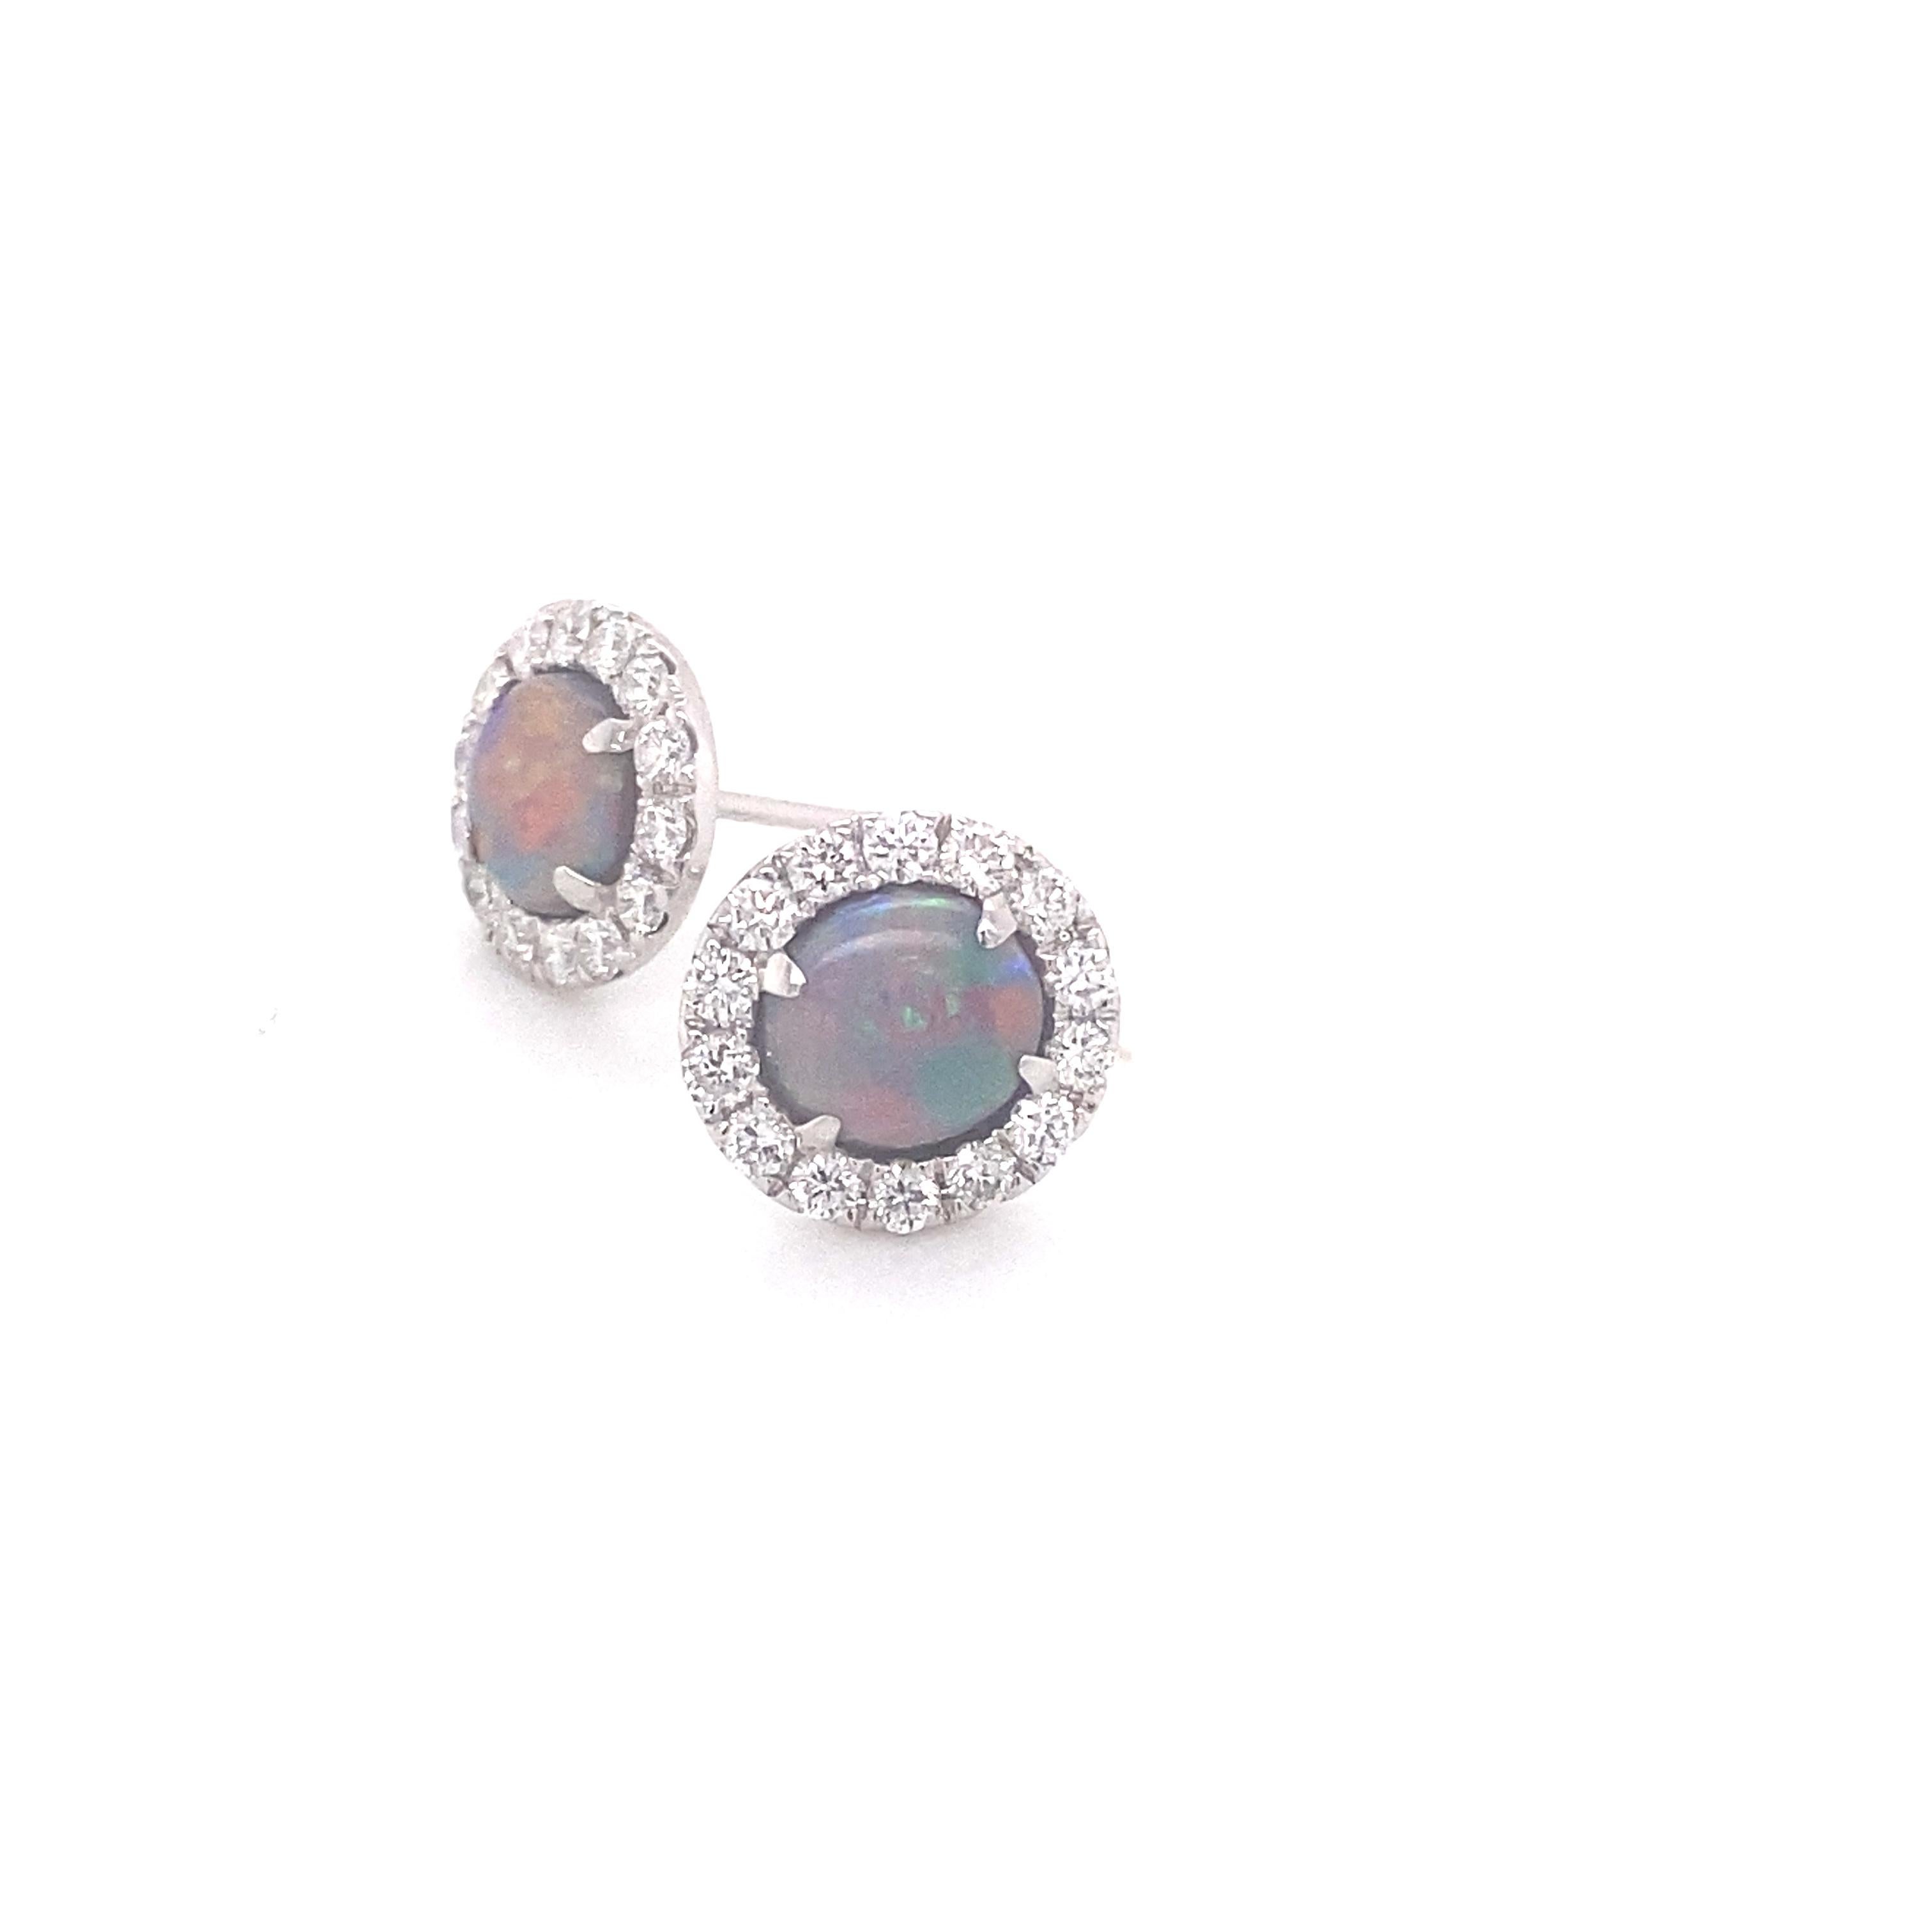 These beautiful stud earrings feature 2.00ctw of natural oval opals surrounded by a halo of .86ctw diamonds. These are set in 18 karat white gold and have a friction post back. Each opal is sourced from the Lightning Ridge area of Australia and is